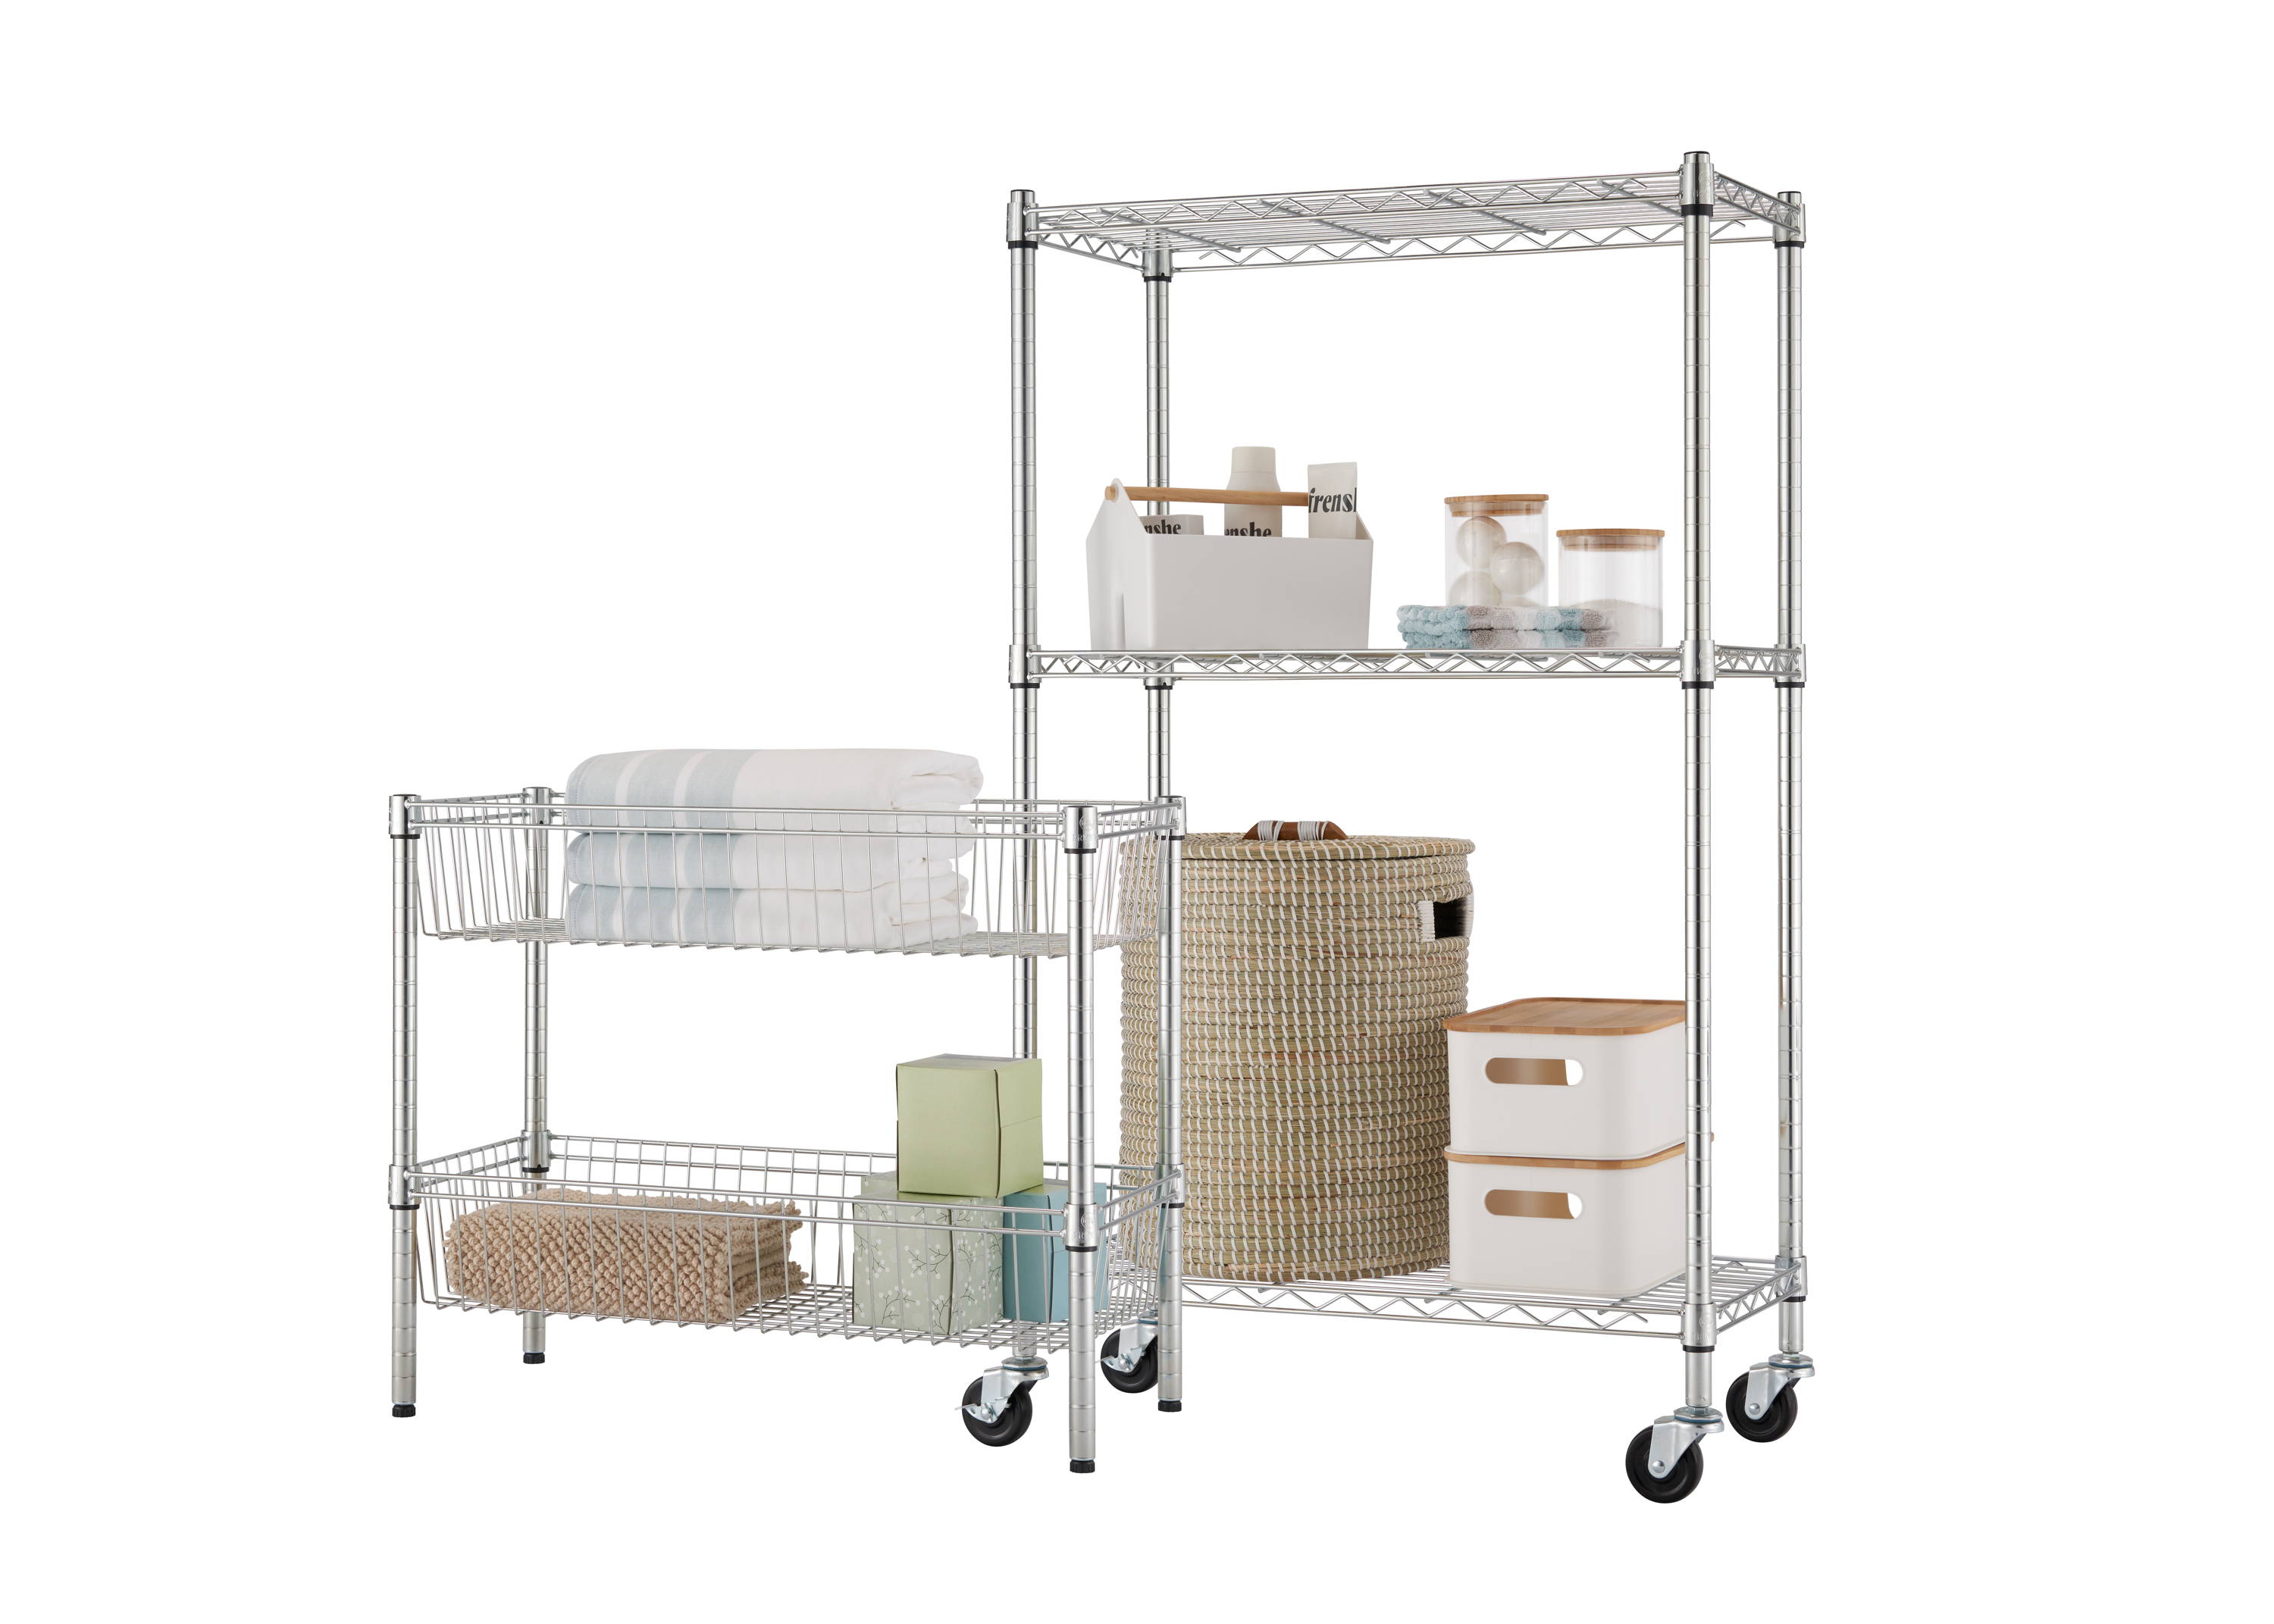 a 2-tier shelves and a 3-tier shelves - both with product on shelves